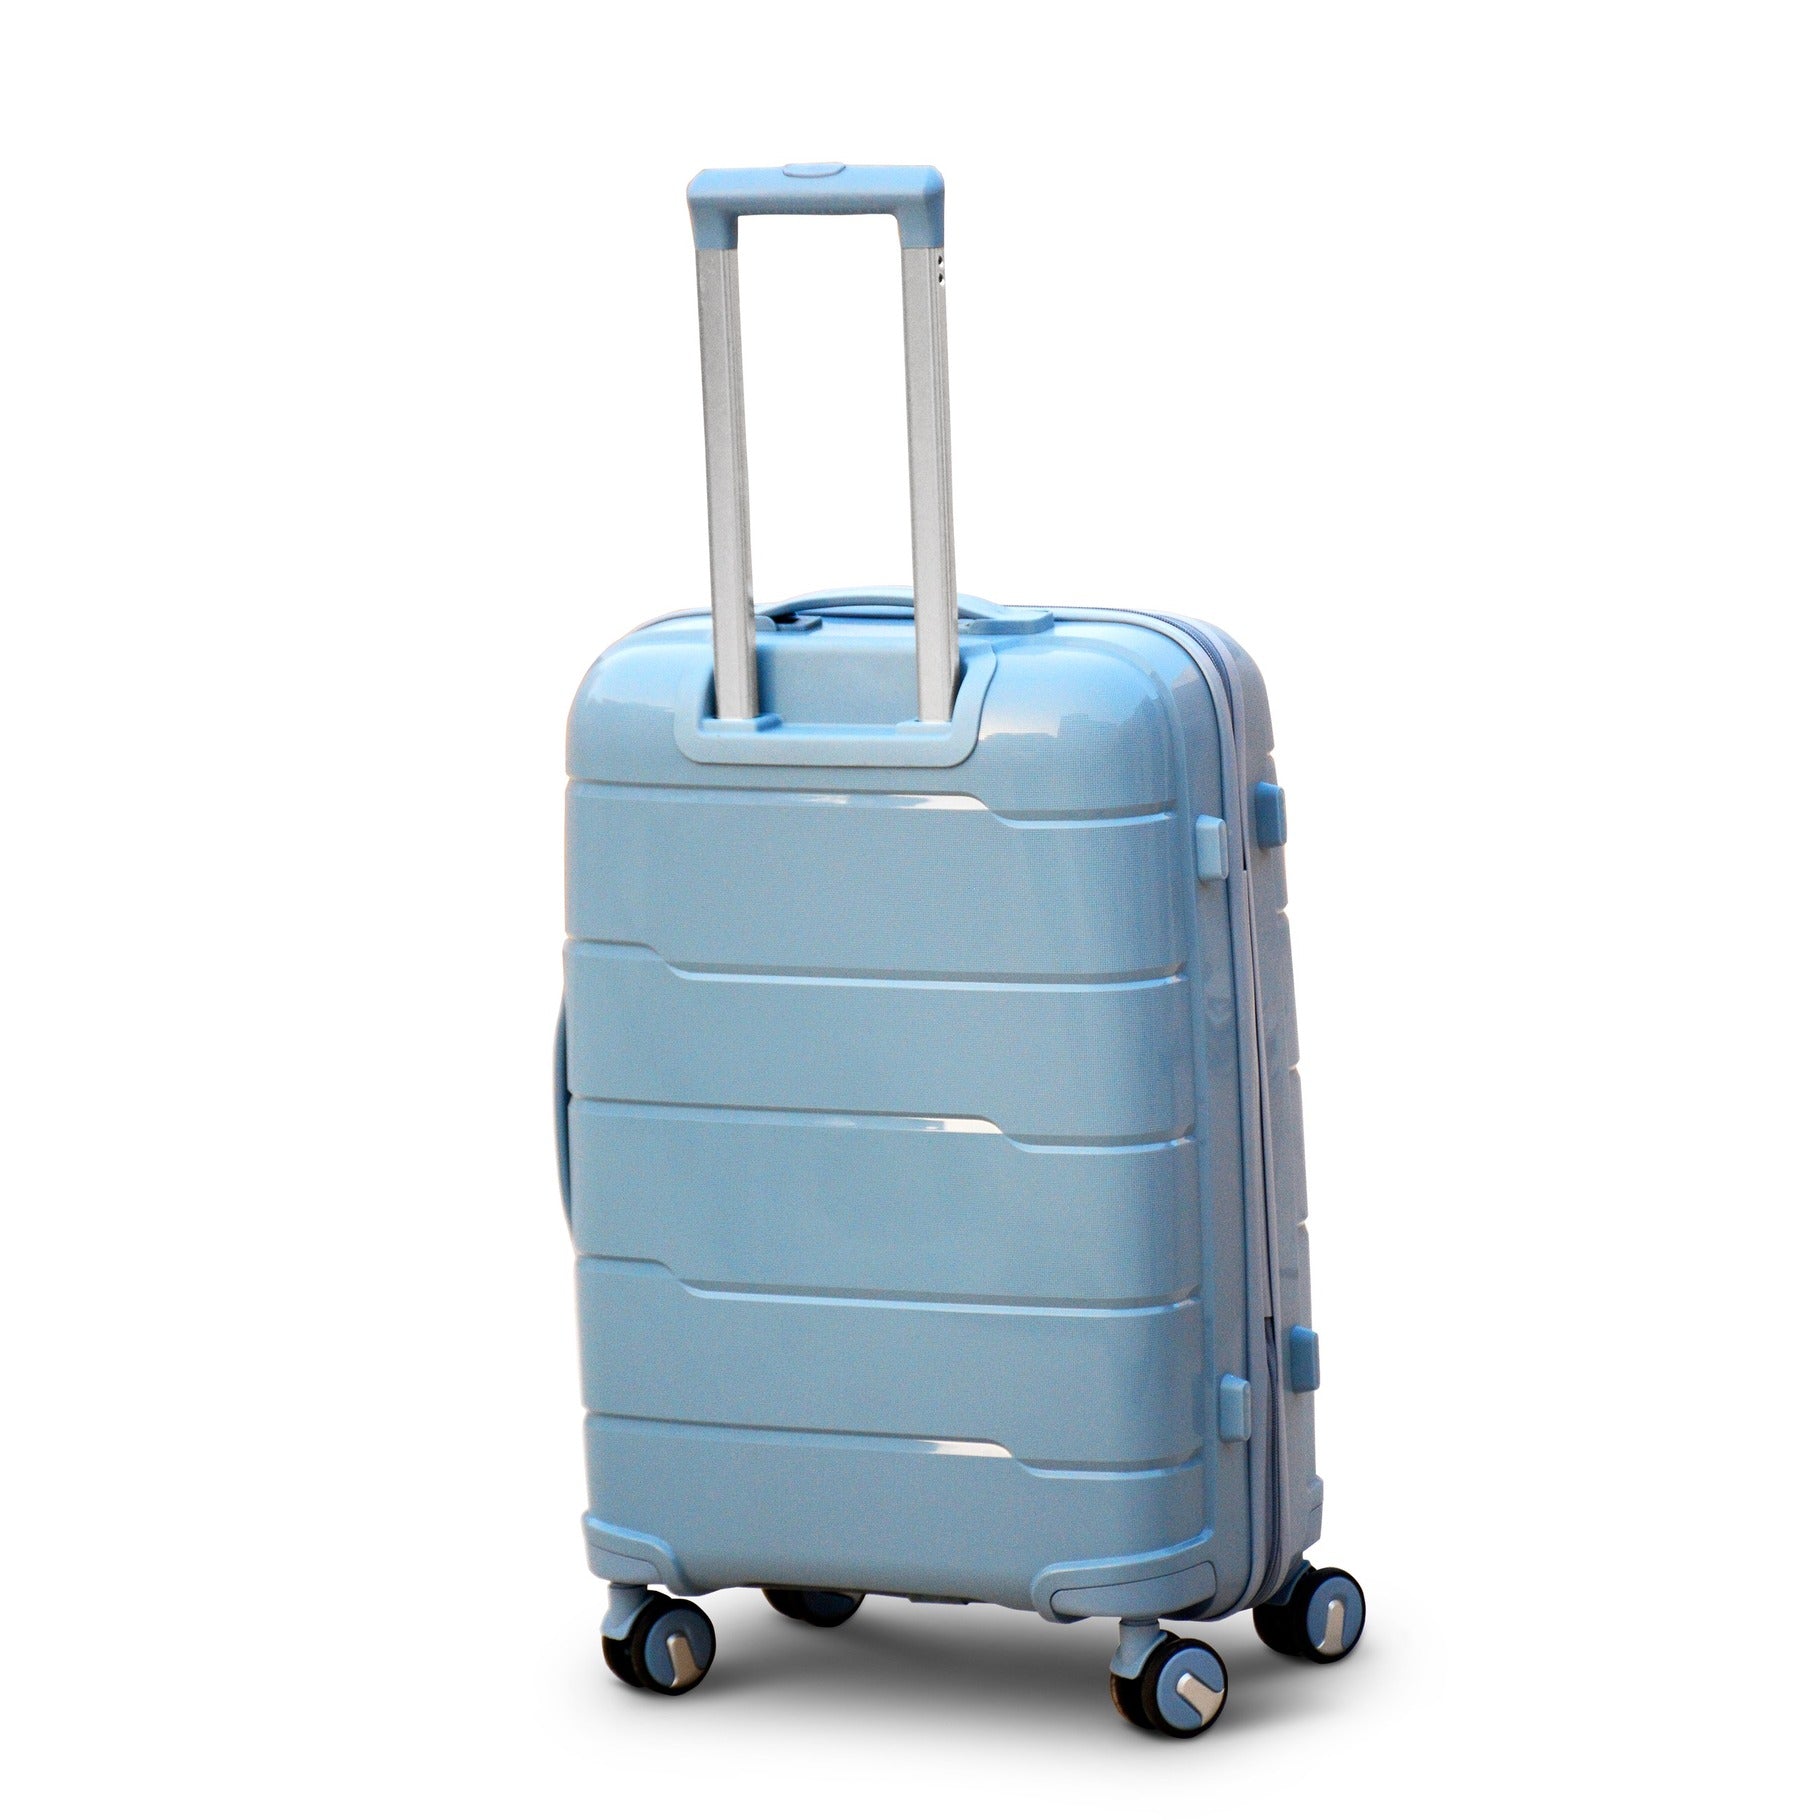 28" Grey Colour Ceramic Smooth PP Lightweight Luggage Bag with Double Spinner Wheel